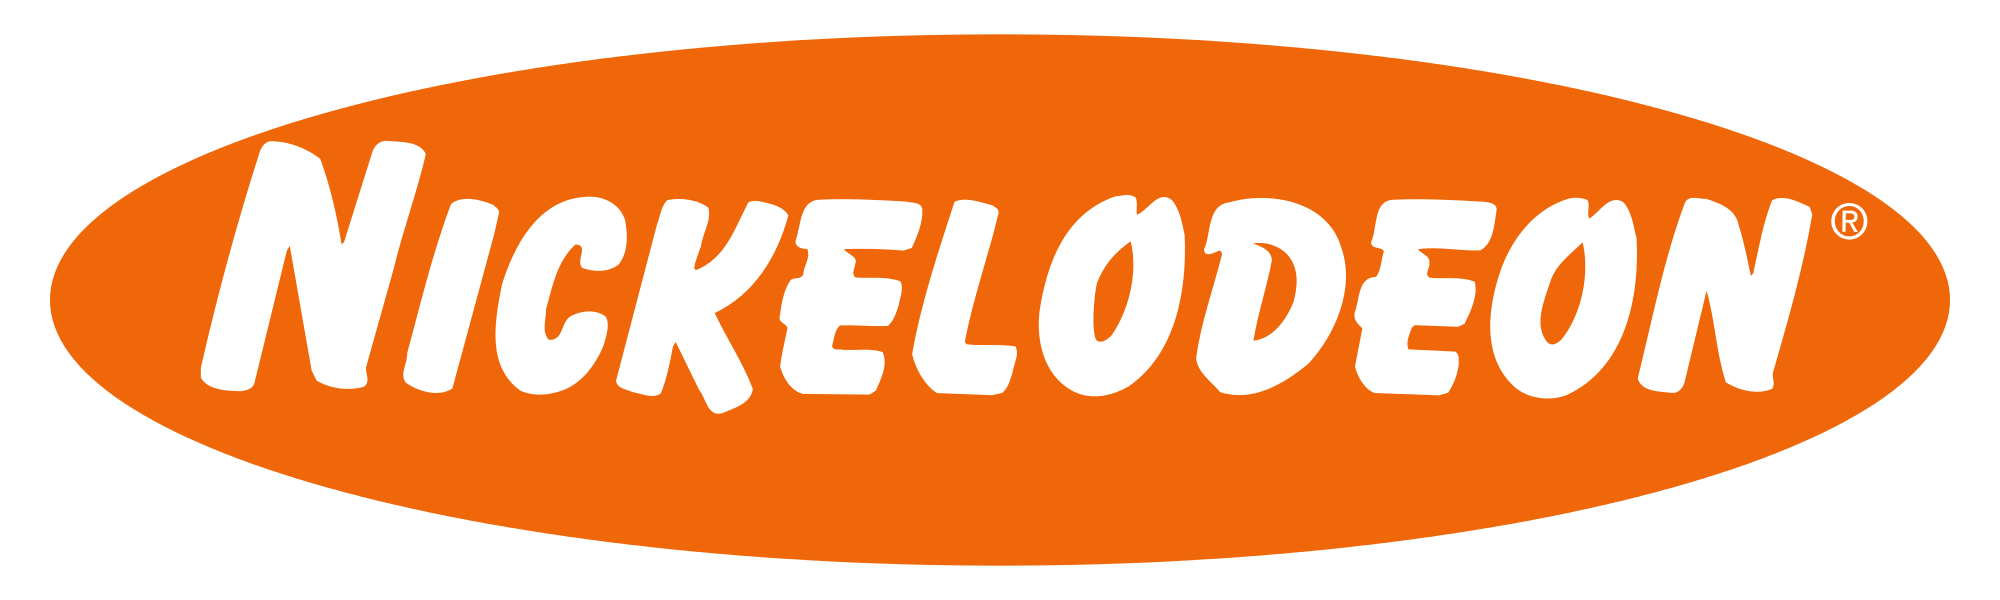 Nickelodean Logo - Nickelodeon Logo, Nickelodeon Symbol Meaning, History and Evolution